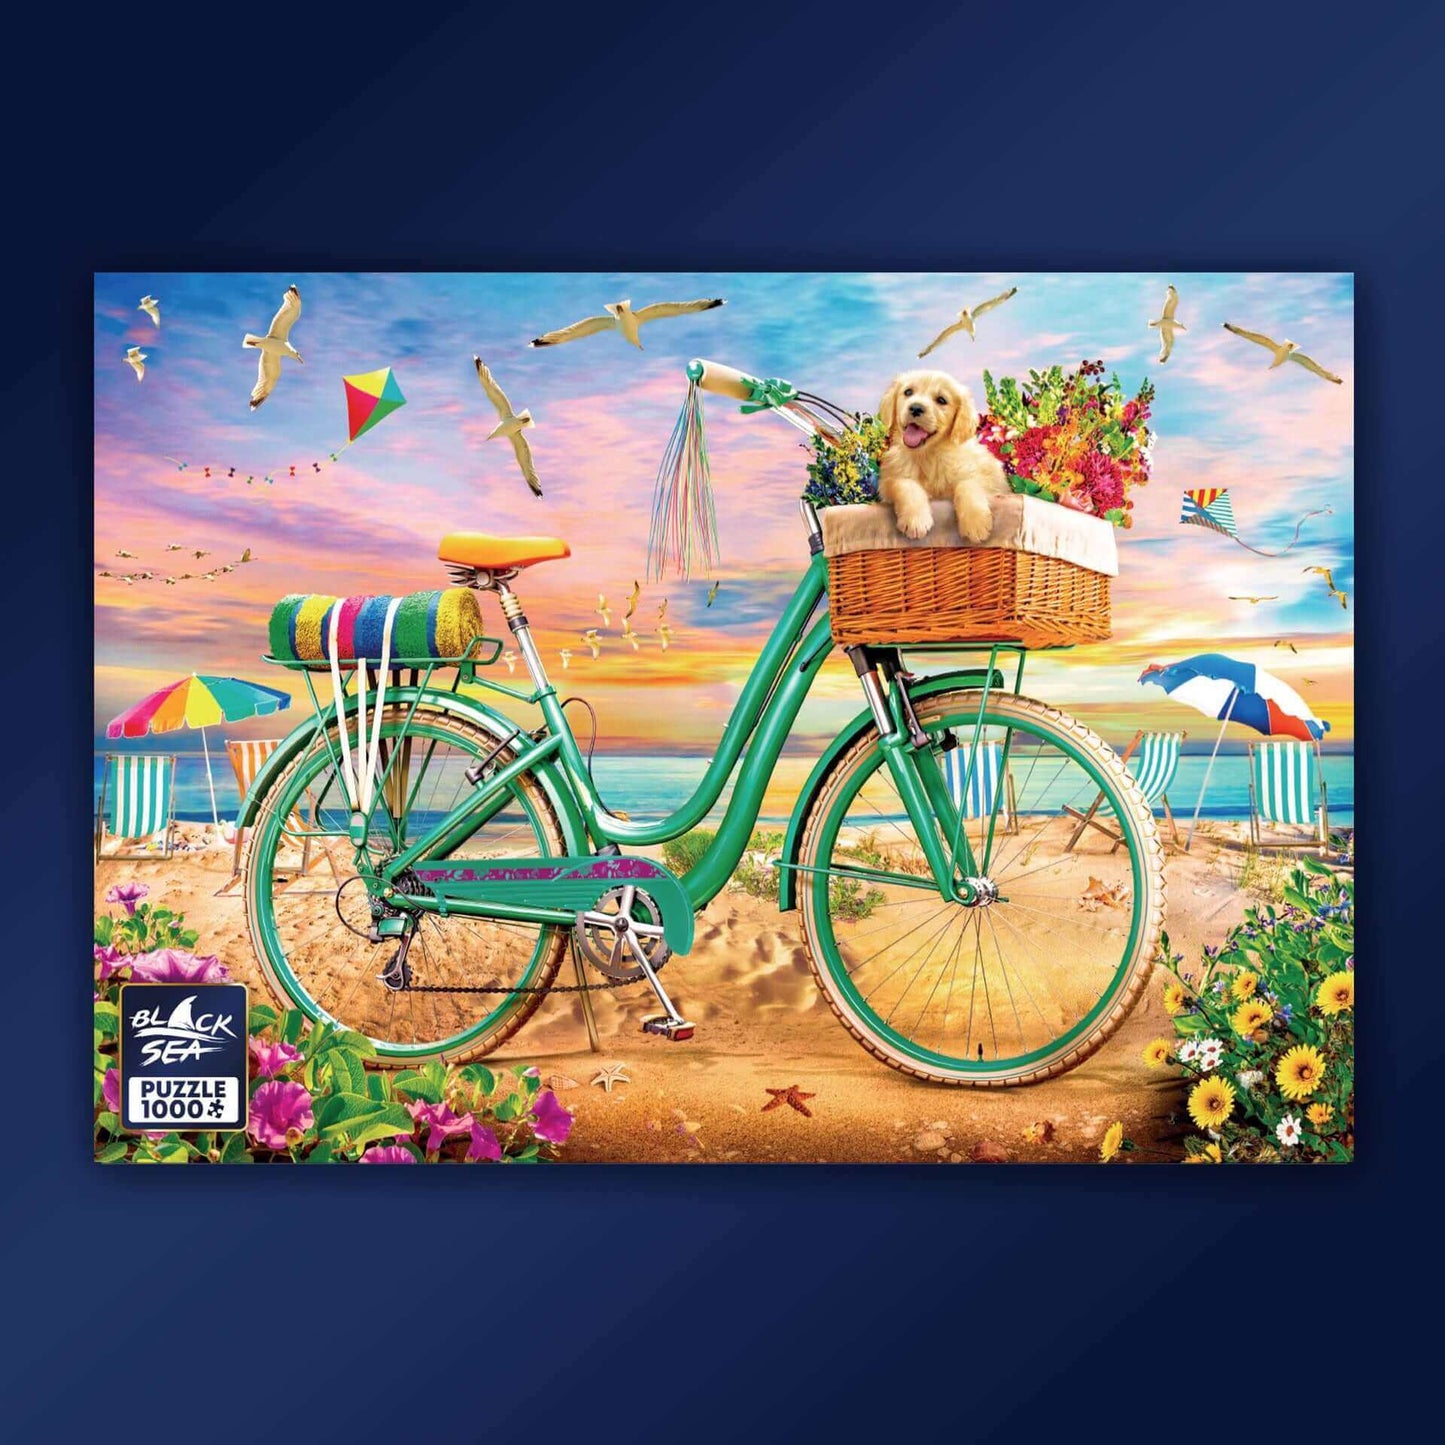 Puzzle Black Sea Premium 1000 pieces - Together on the Beach, Summer is the most anticipated season of the year. It’s time for relaxation and adventures which are enjoyed the most when shared with friends. Who says that a friend necessarily has to be a hu